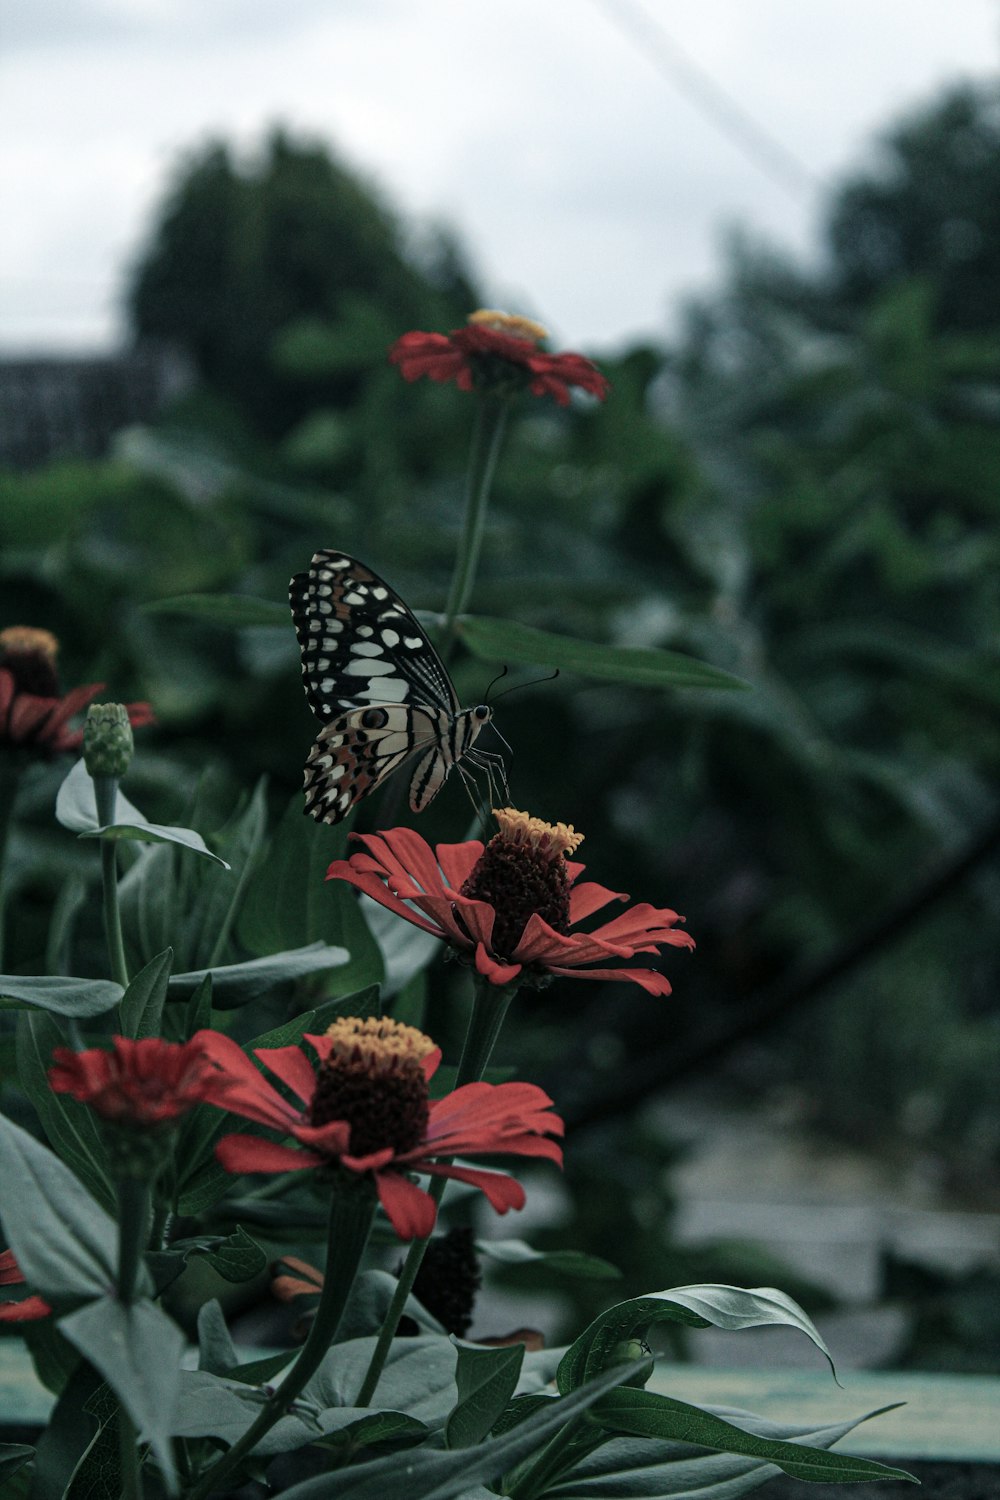 black and white butterfly on red flower